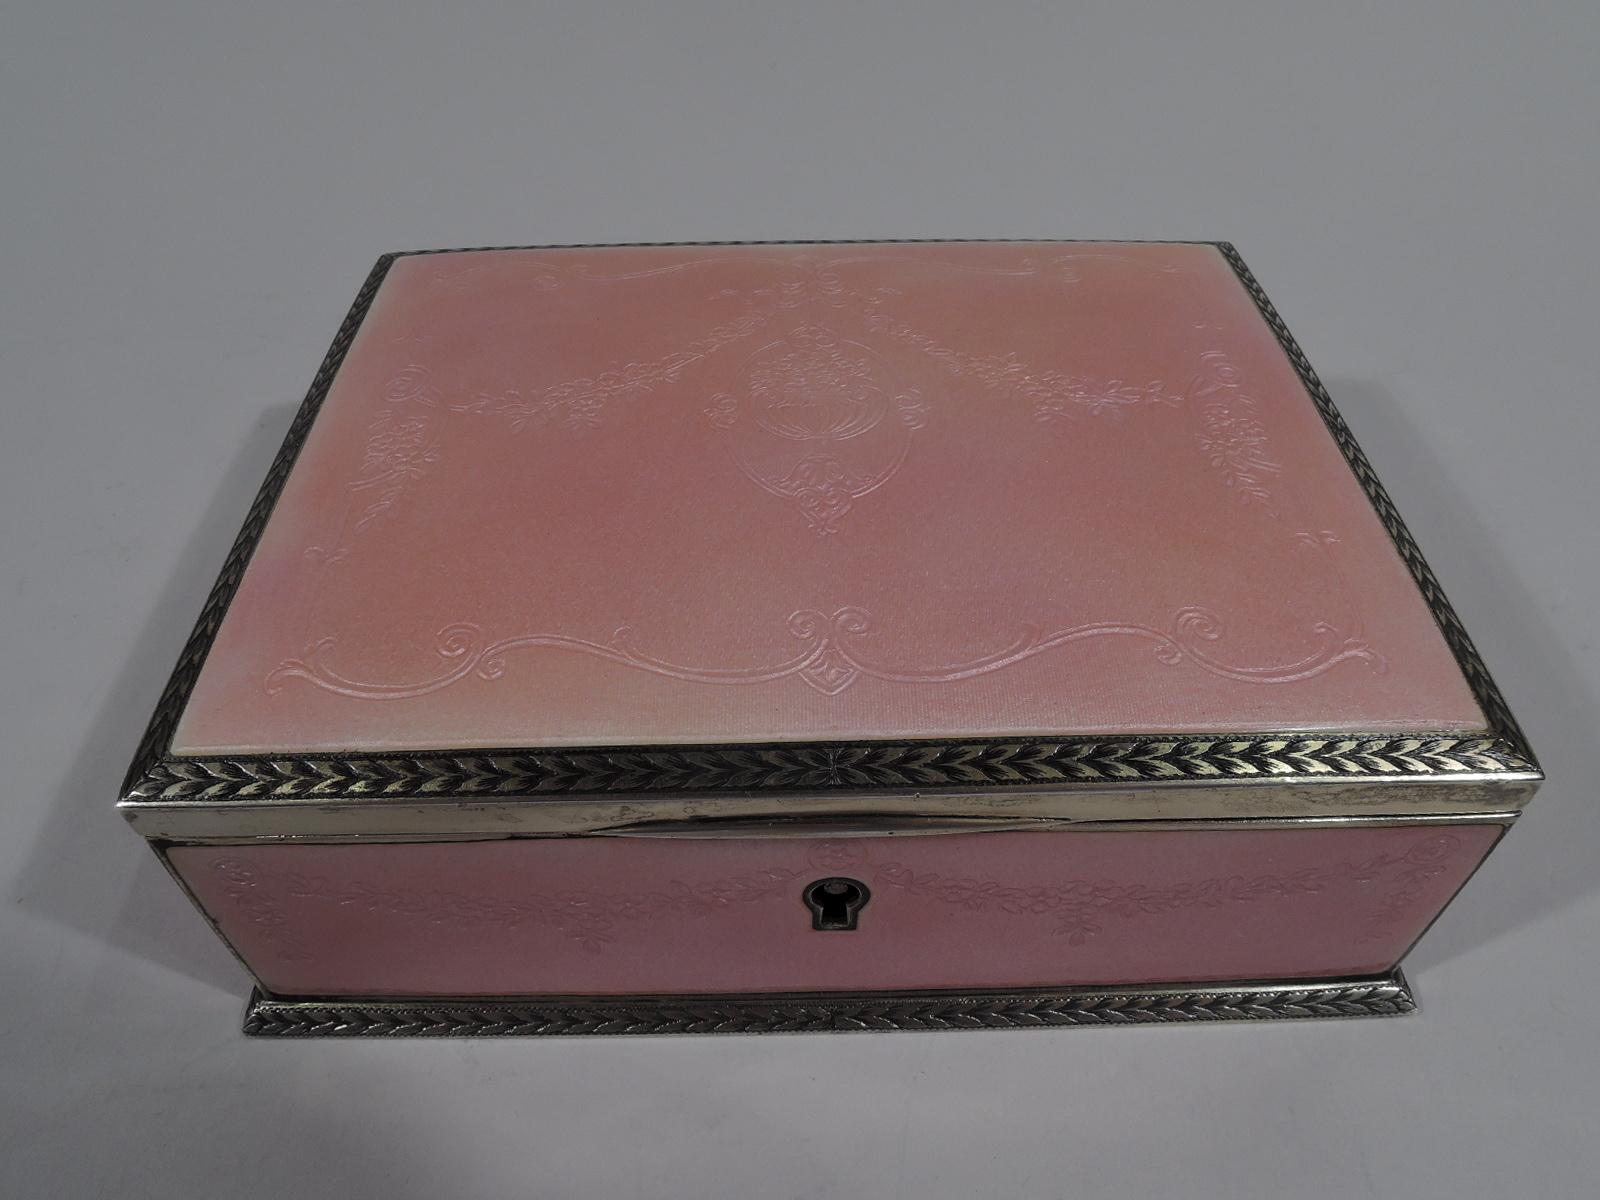 Edwardian Regency gilt sterling silver and pink guilloche enamel box. Made by William B. Kerr in Newark, ca 1910. Rectangular with straight sides and gently curved and hinged cover. Sides and cover top enameled with floral garlands on wavy ground.